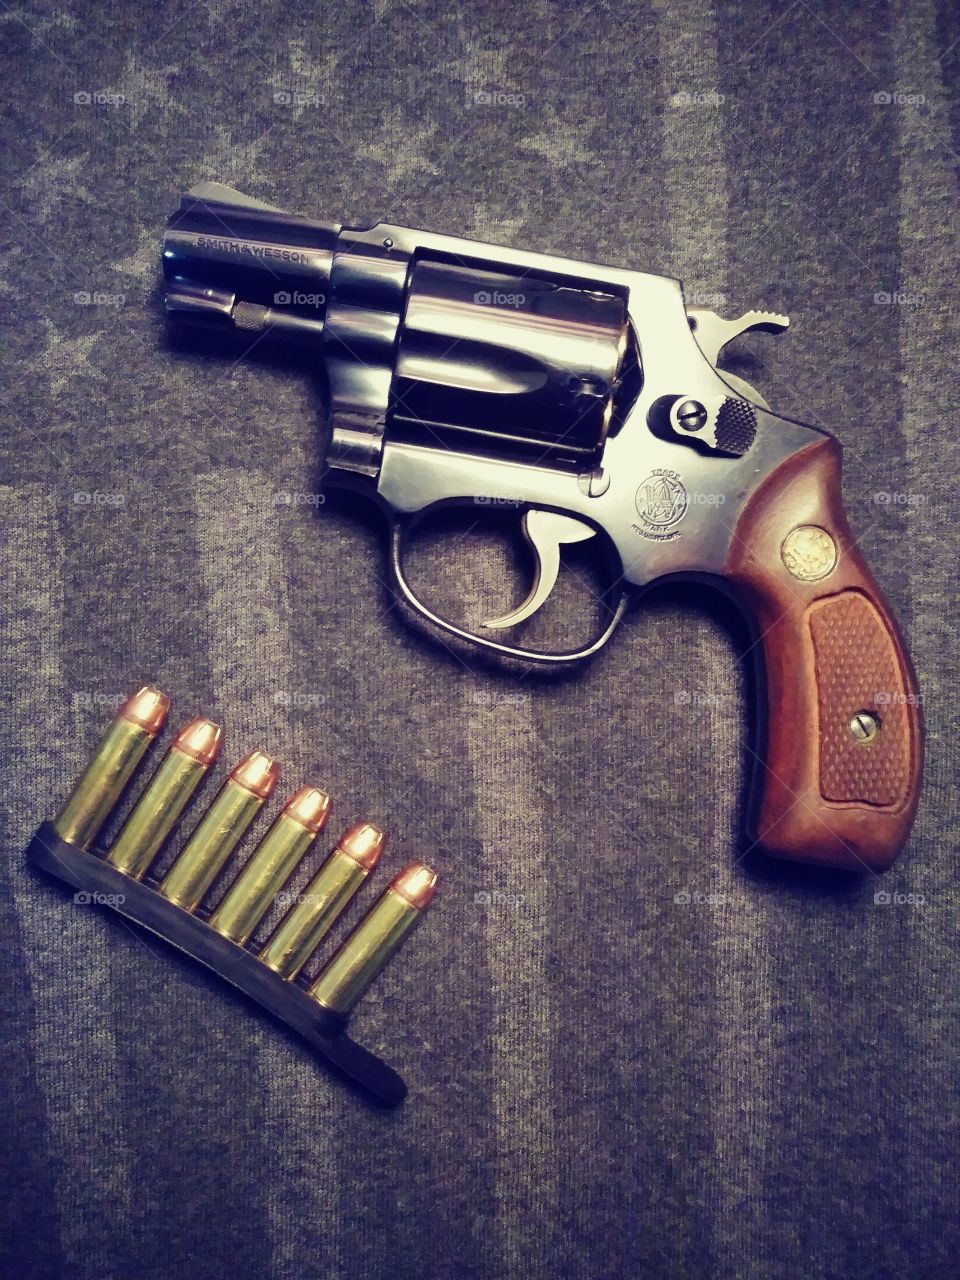 1971 Smith & Wesson - Chiefs Special Model 36 - 38 spl. Hornady hollow points. Bianchi speed strip. American flag.